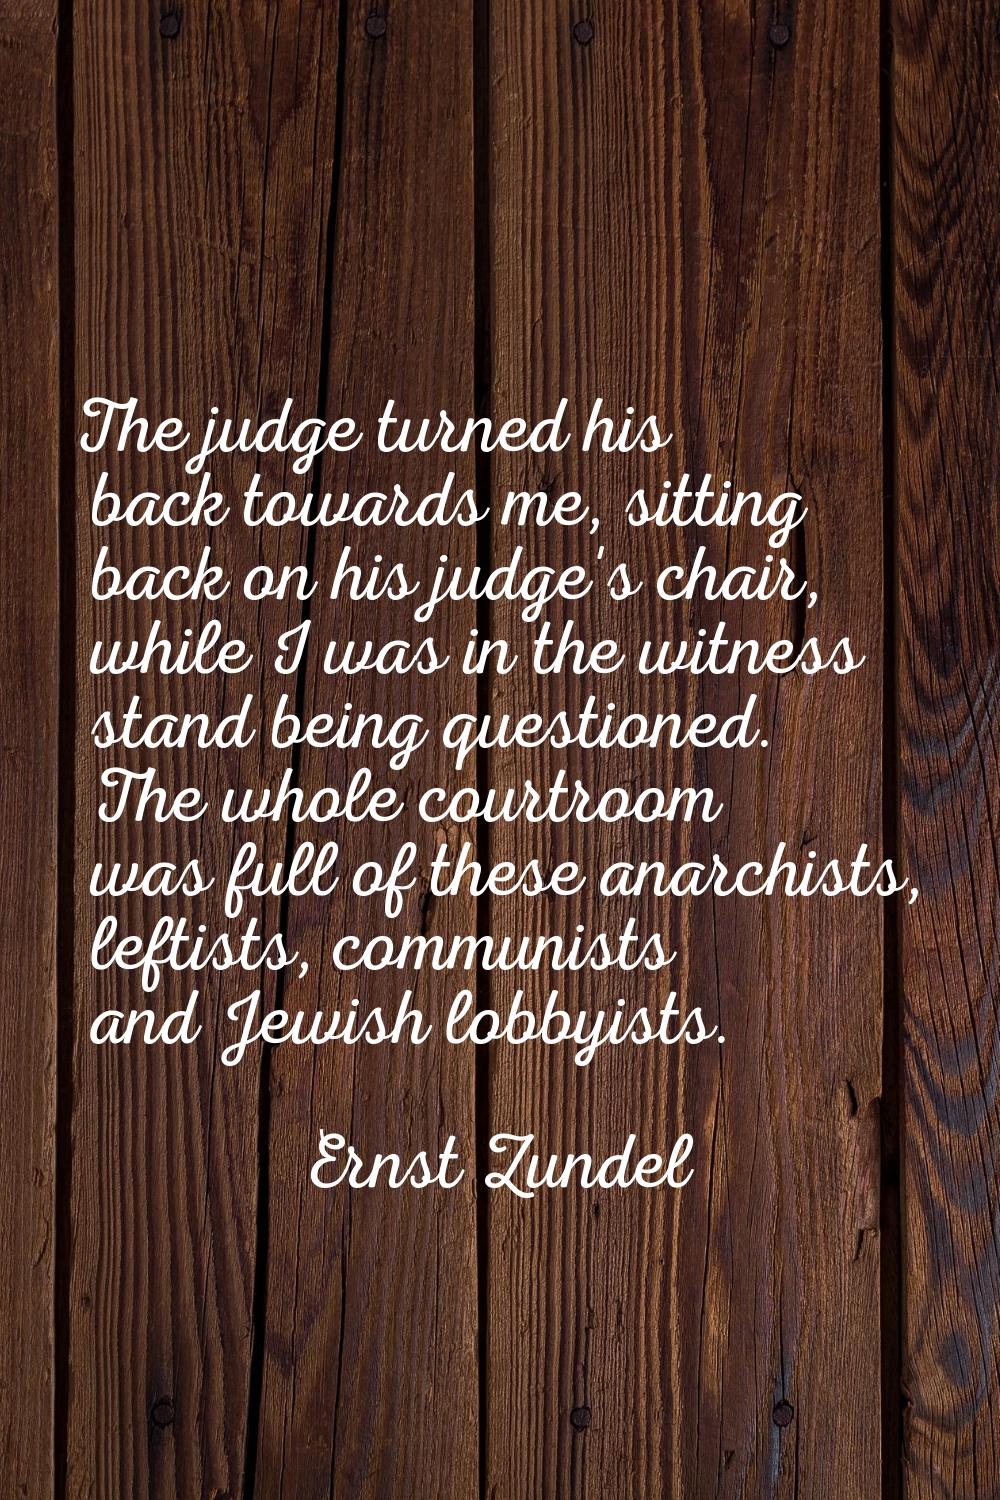 The judge turned his back towards me, sitting back on his judge's chair, while I was in the witness